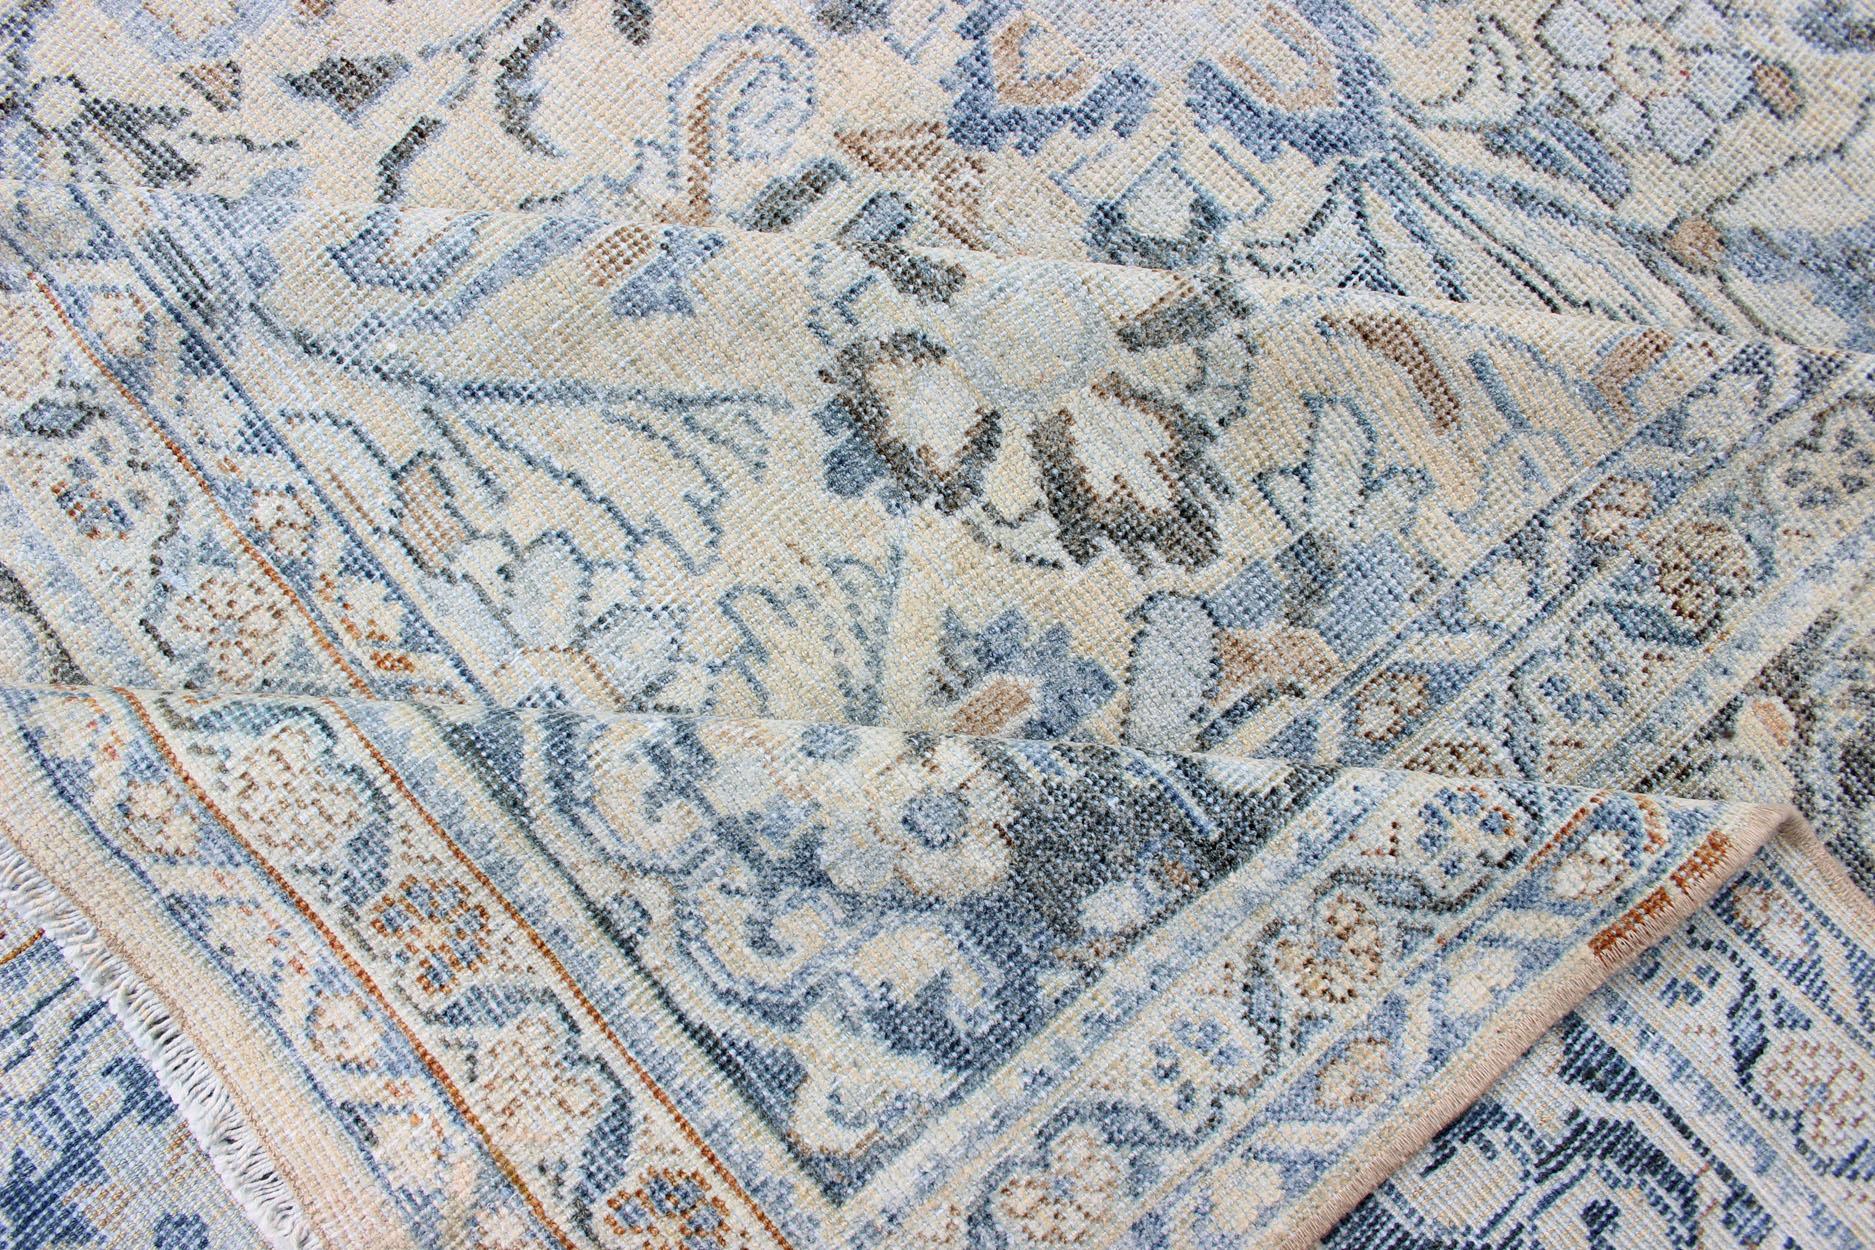 20th Century Antique Persian Mahal Rug with Sub Floral Design in Blue, Charcoal & Cream